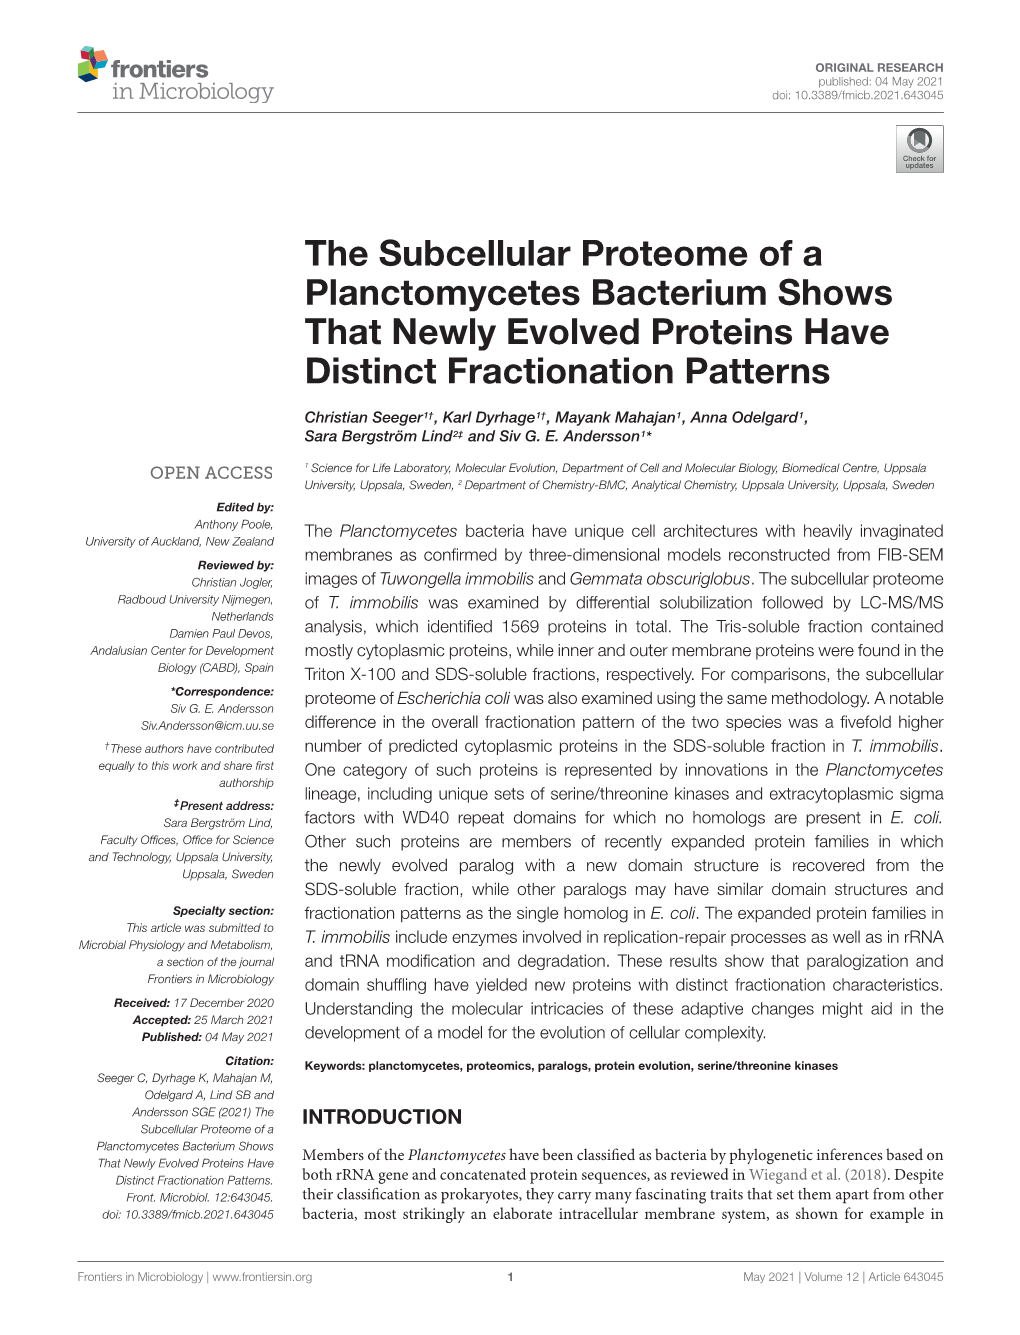 The Subcellular Proteome of a Planctomycetes Bacterium Shows That Newly Evolved Proteins Have Distinct Fractionation Patterns